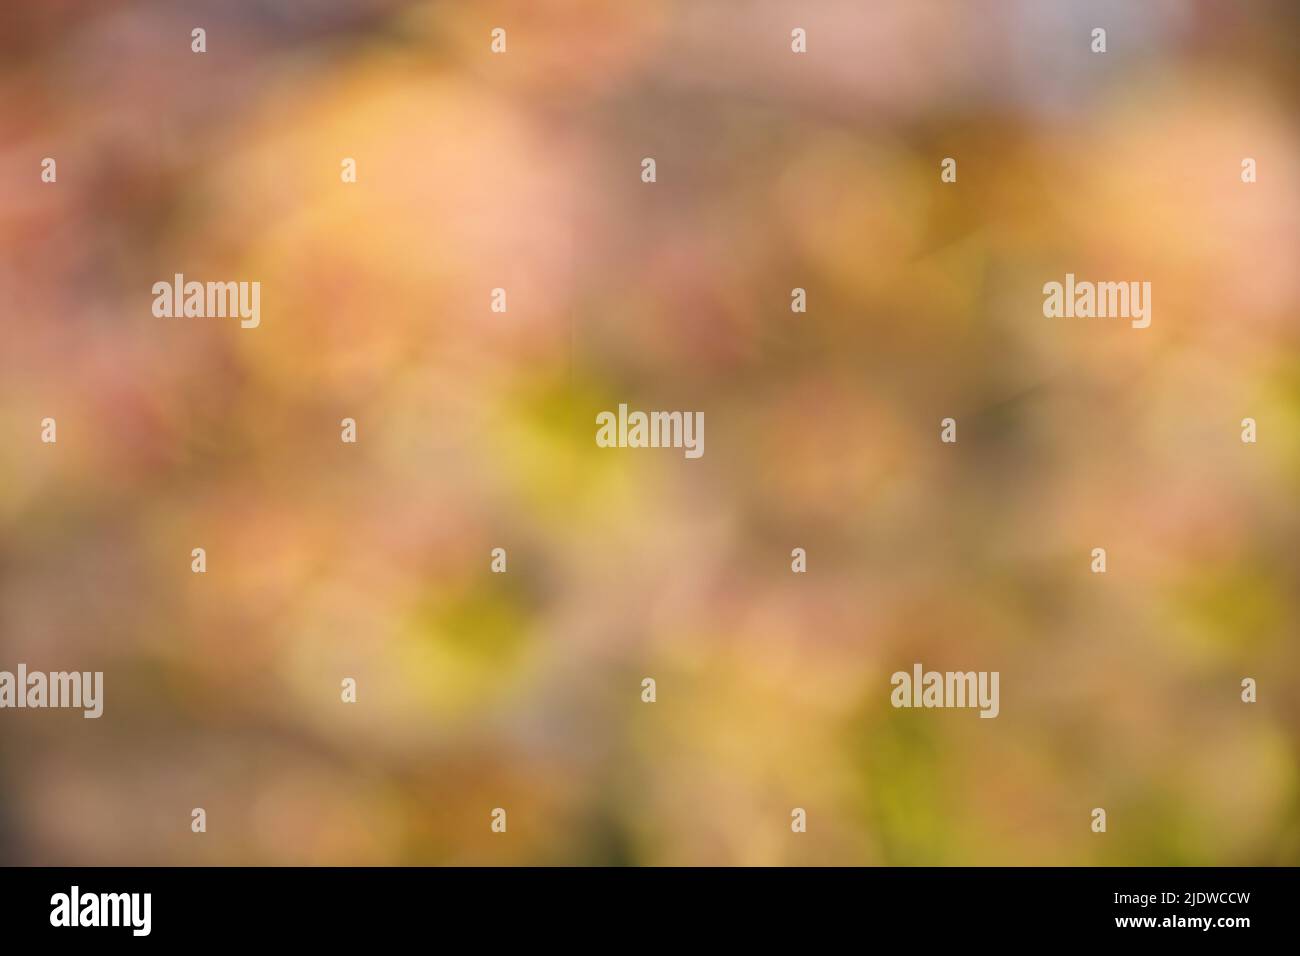 Abstract blurred background in autumn shades and colors. Autumn blurred background. Defocus colorful leaves abstract backdrop with sun flares. Orange Stock Photo